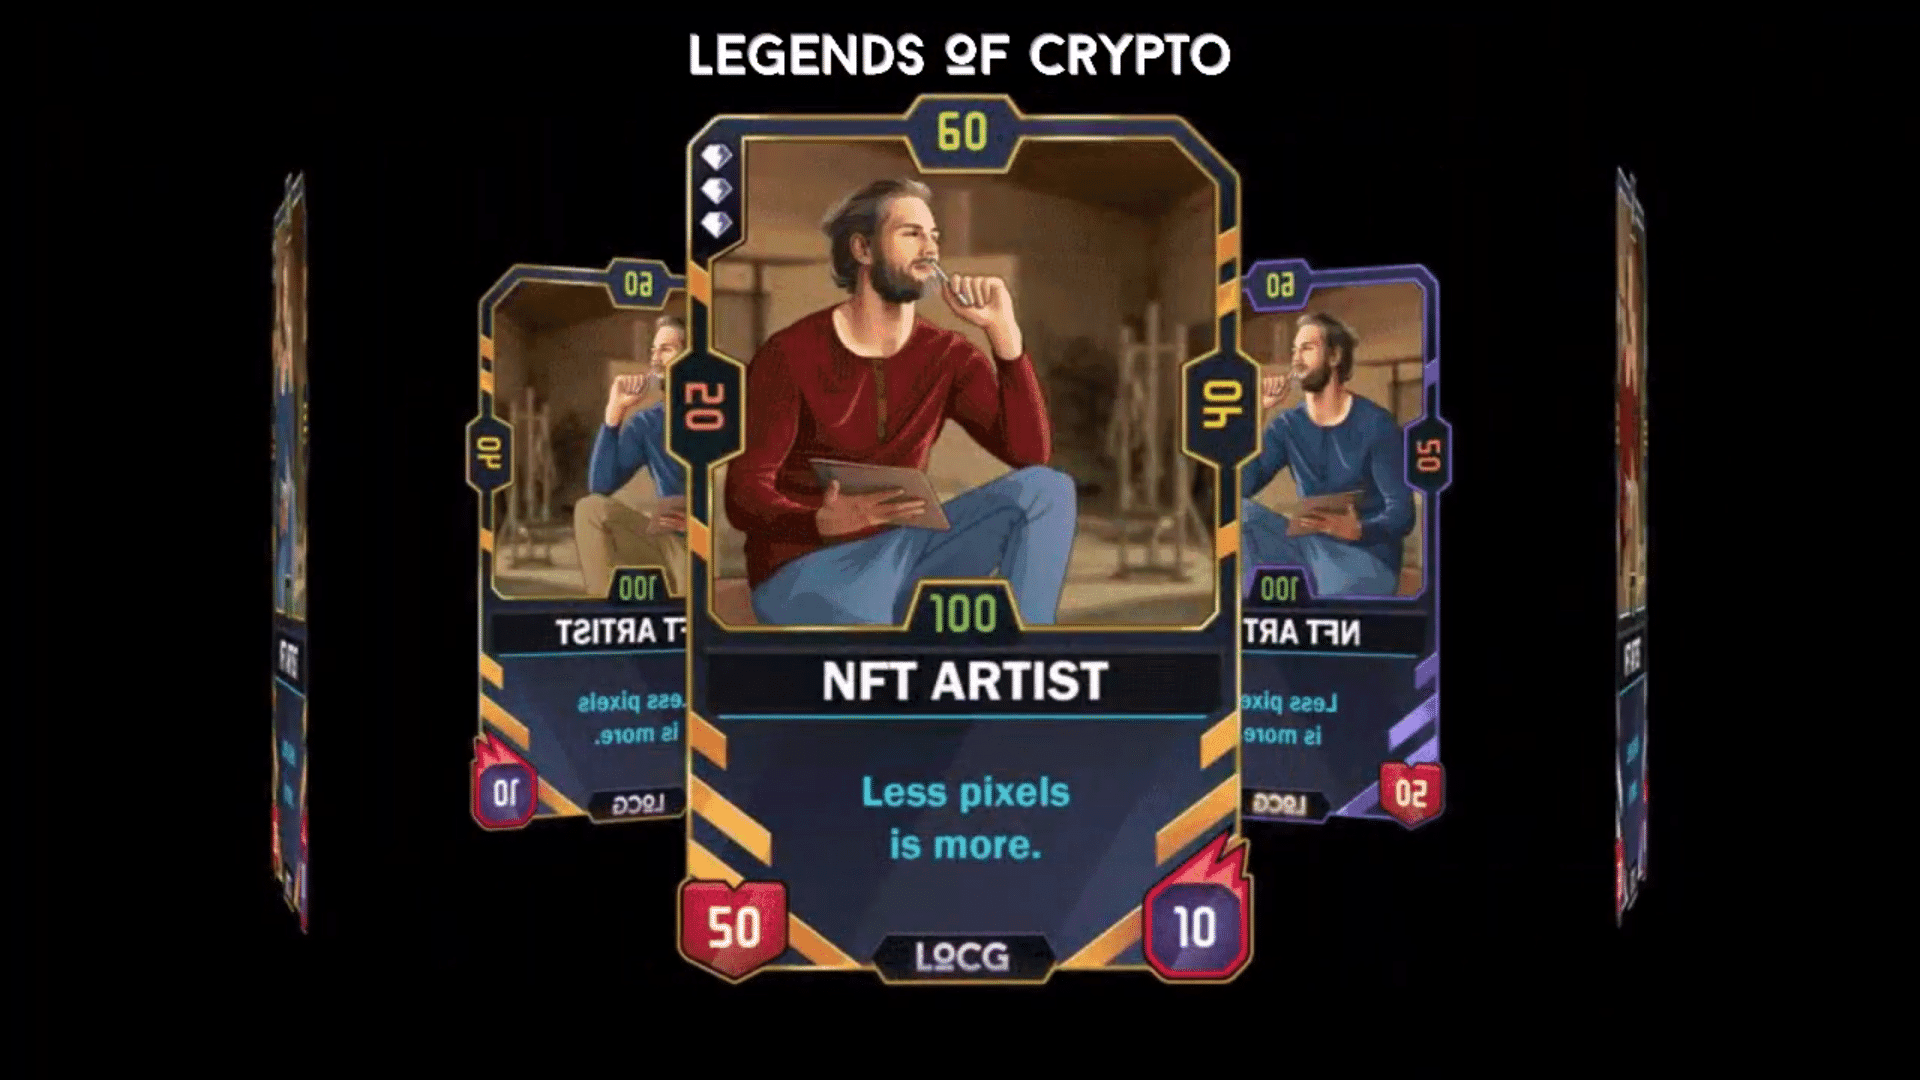 LOCGame is a collectible card game set in the crypto realm, offering mechanics with legendary characters. Engage, collect, and earn rewards.